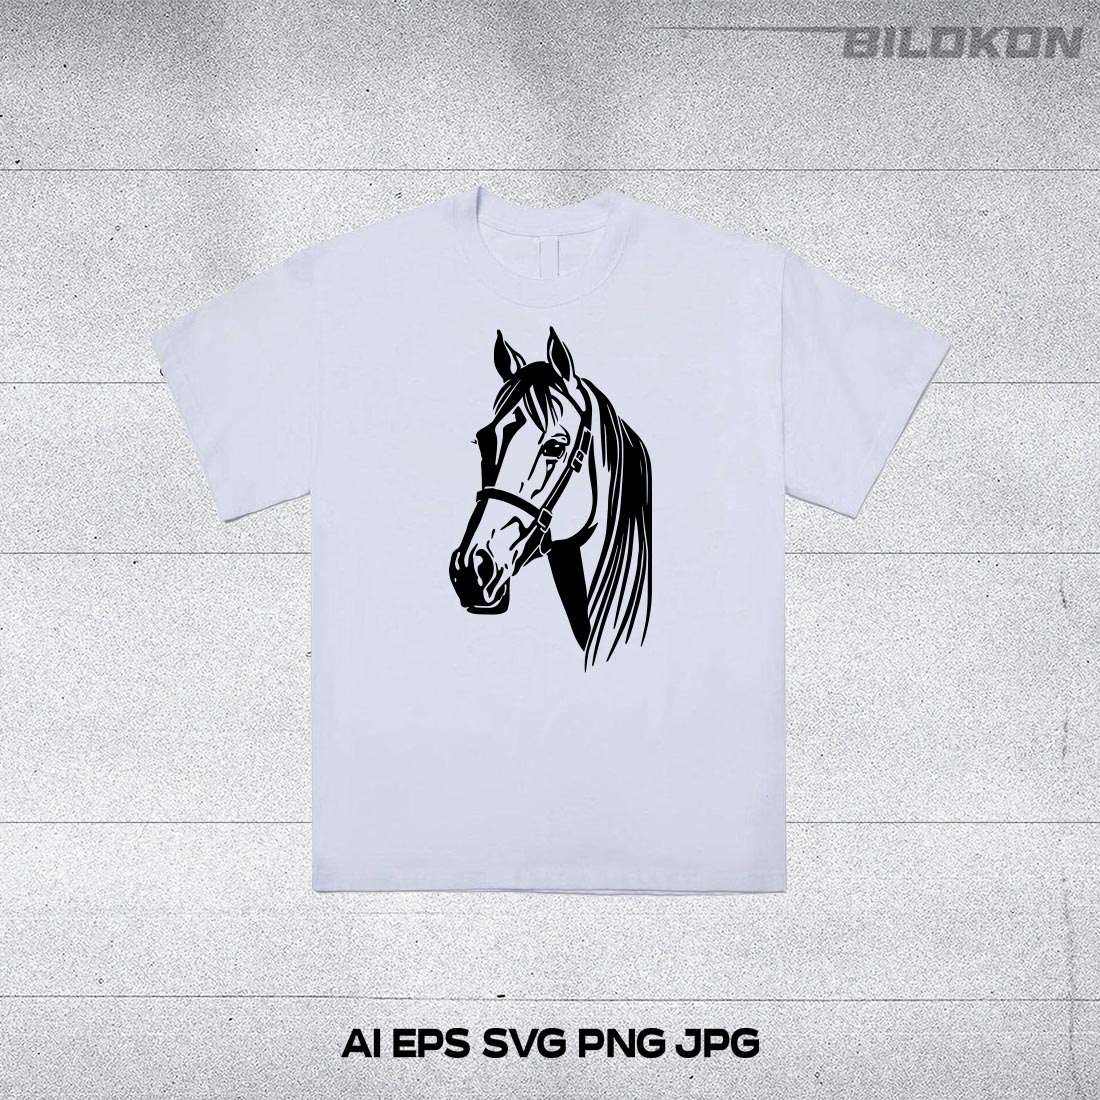 T - shirt with a horse drawn on it.